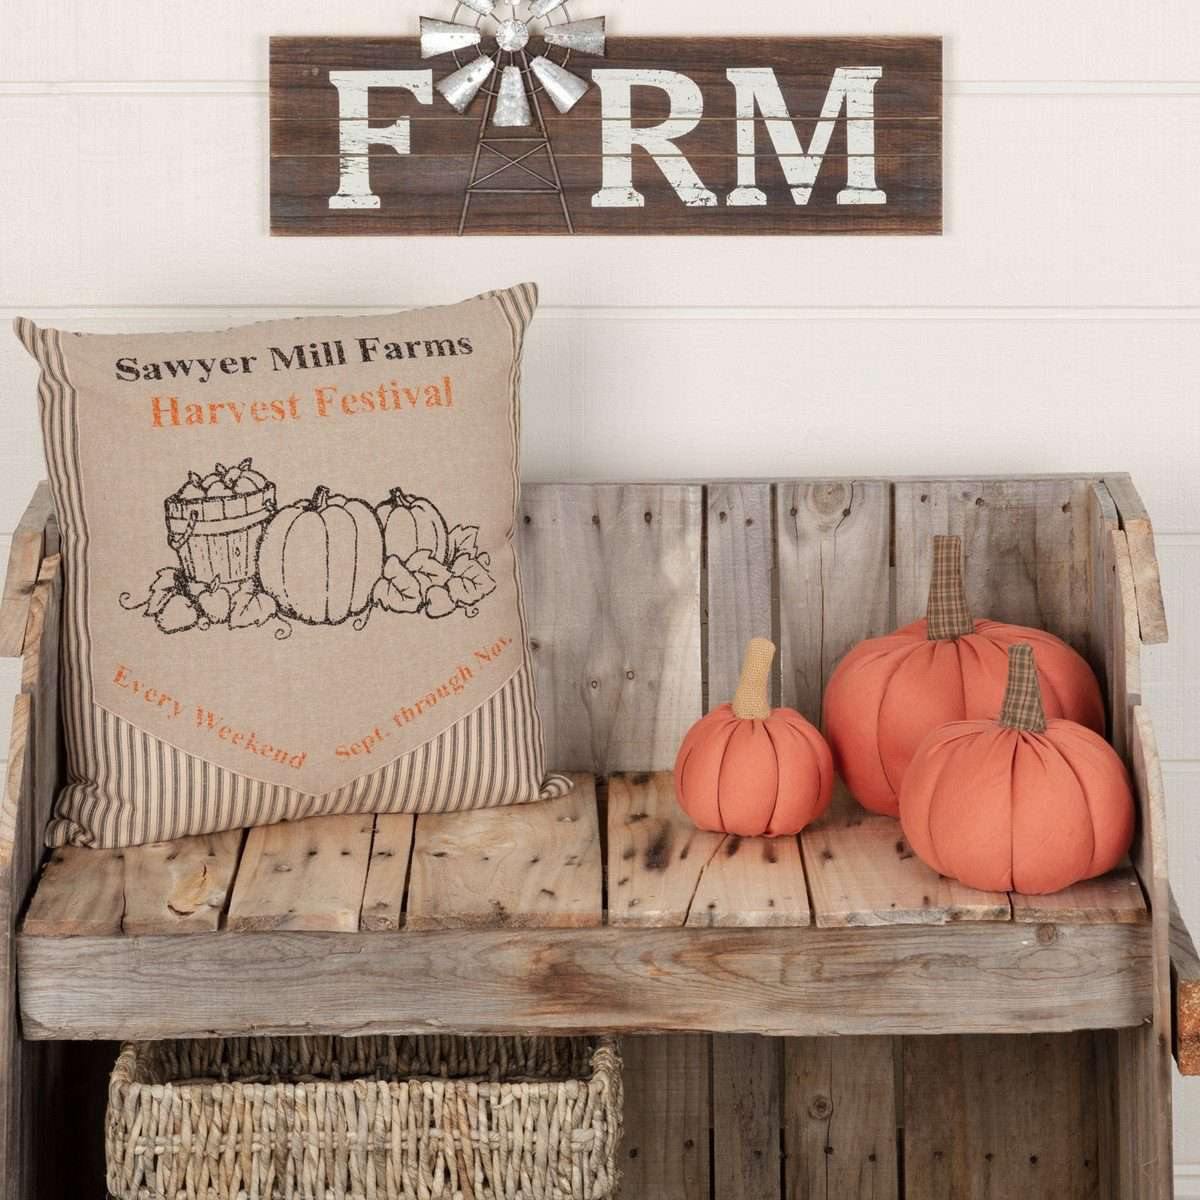 Sawyer Mill Charcoal Harvest Festival Pillow 18x18 VHC Brands